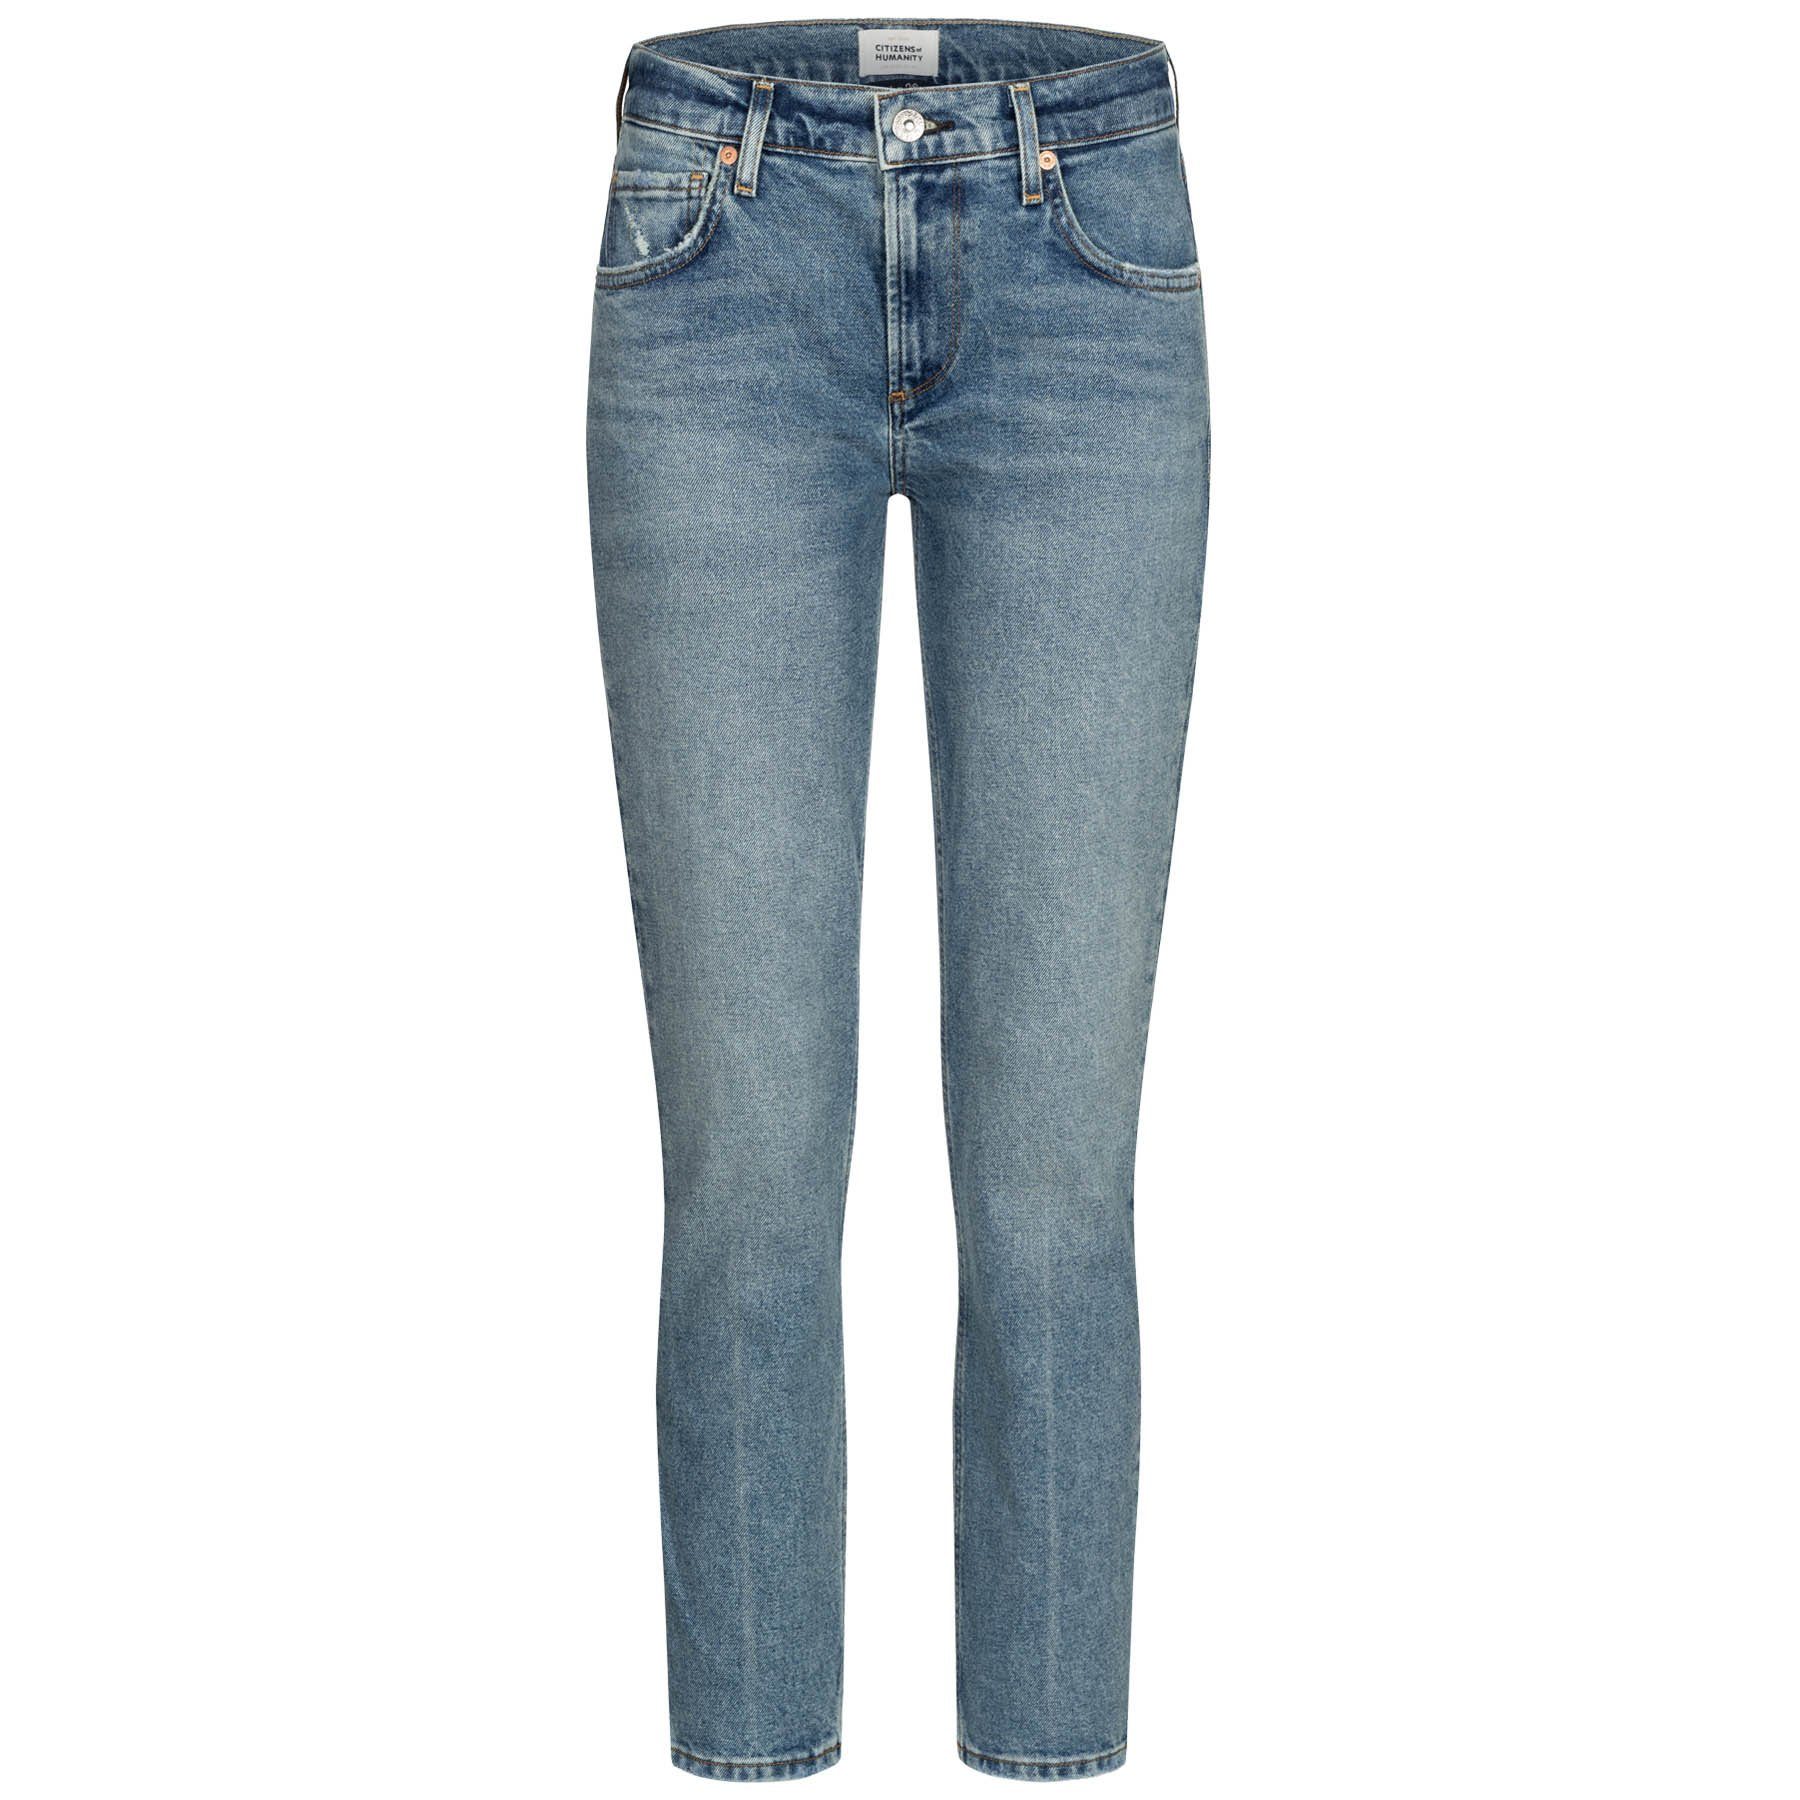 aus RACER Slim-fit-Jeans Baumwolle CITIZENS HUMANITY Jeans OF